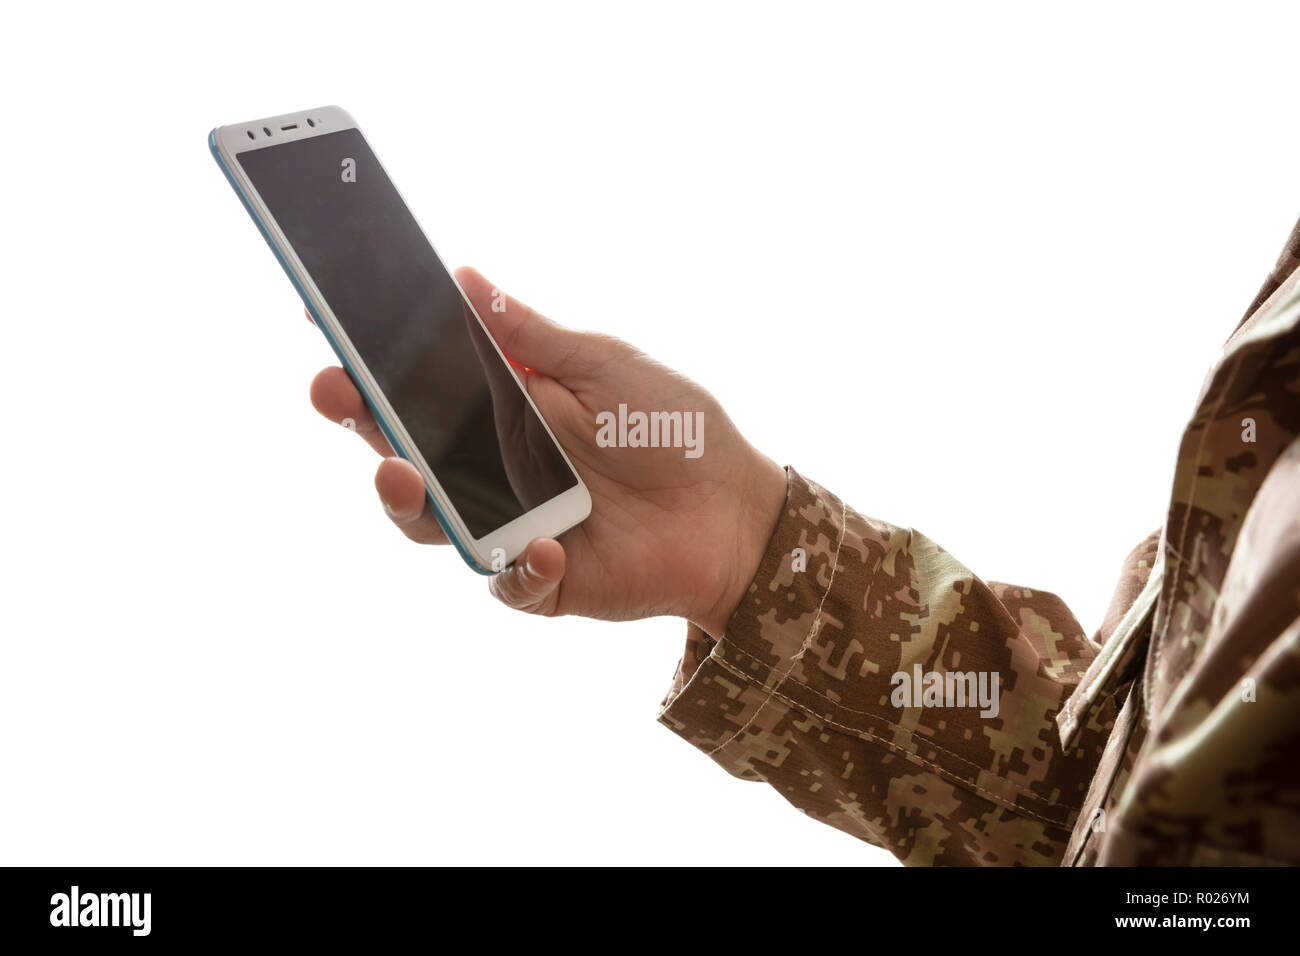 US Army. Young soldier holding a mobile phone standing on white background Stock Photo